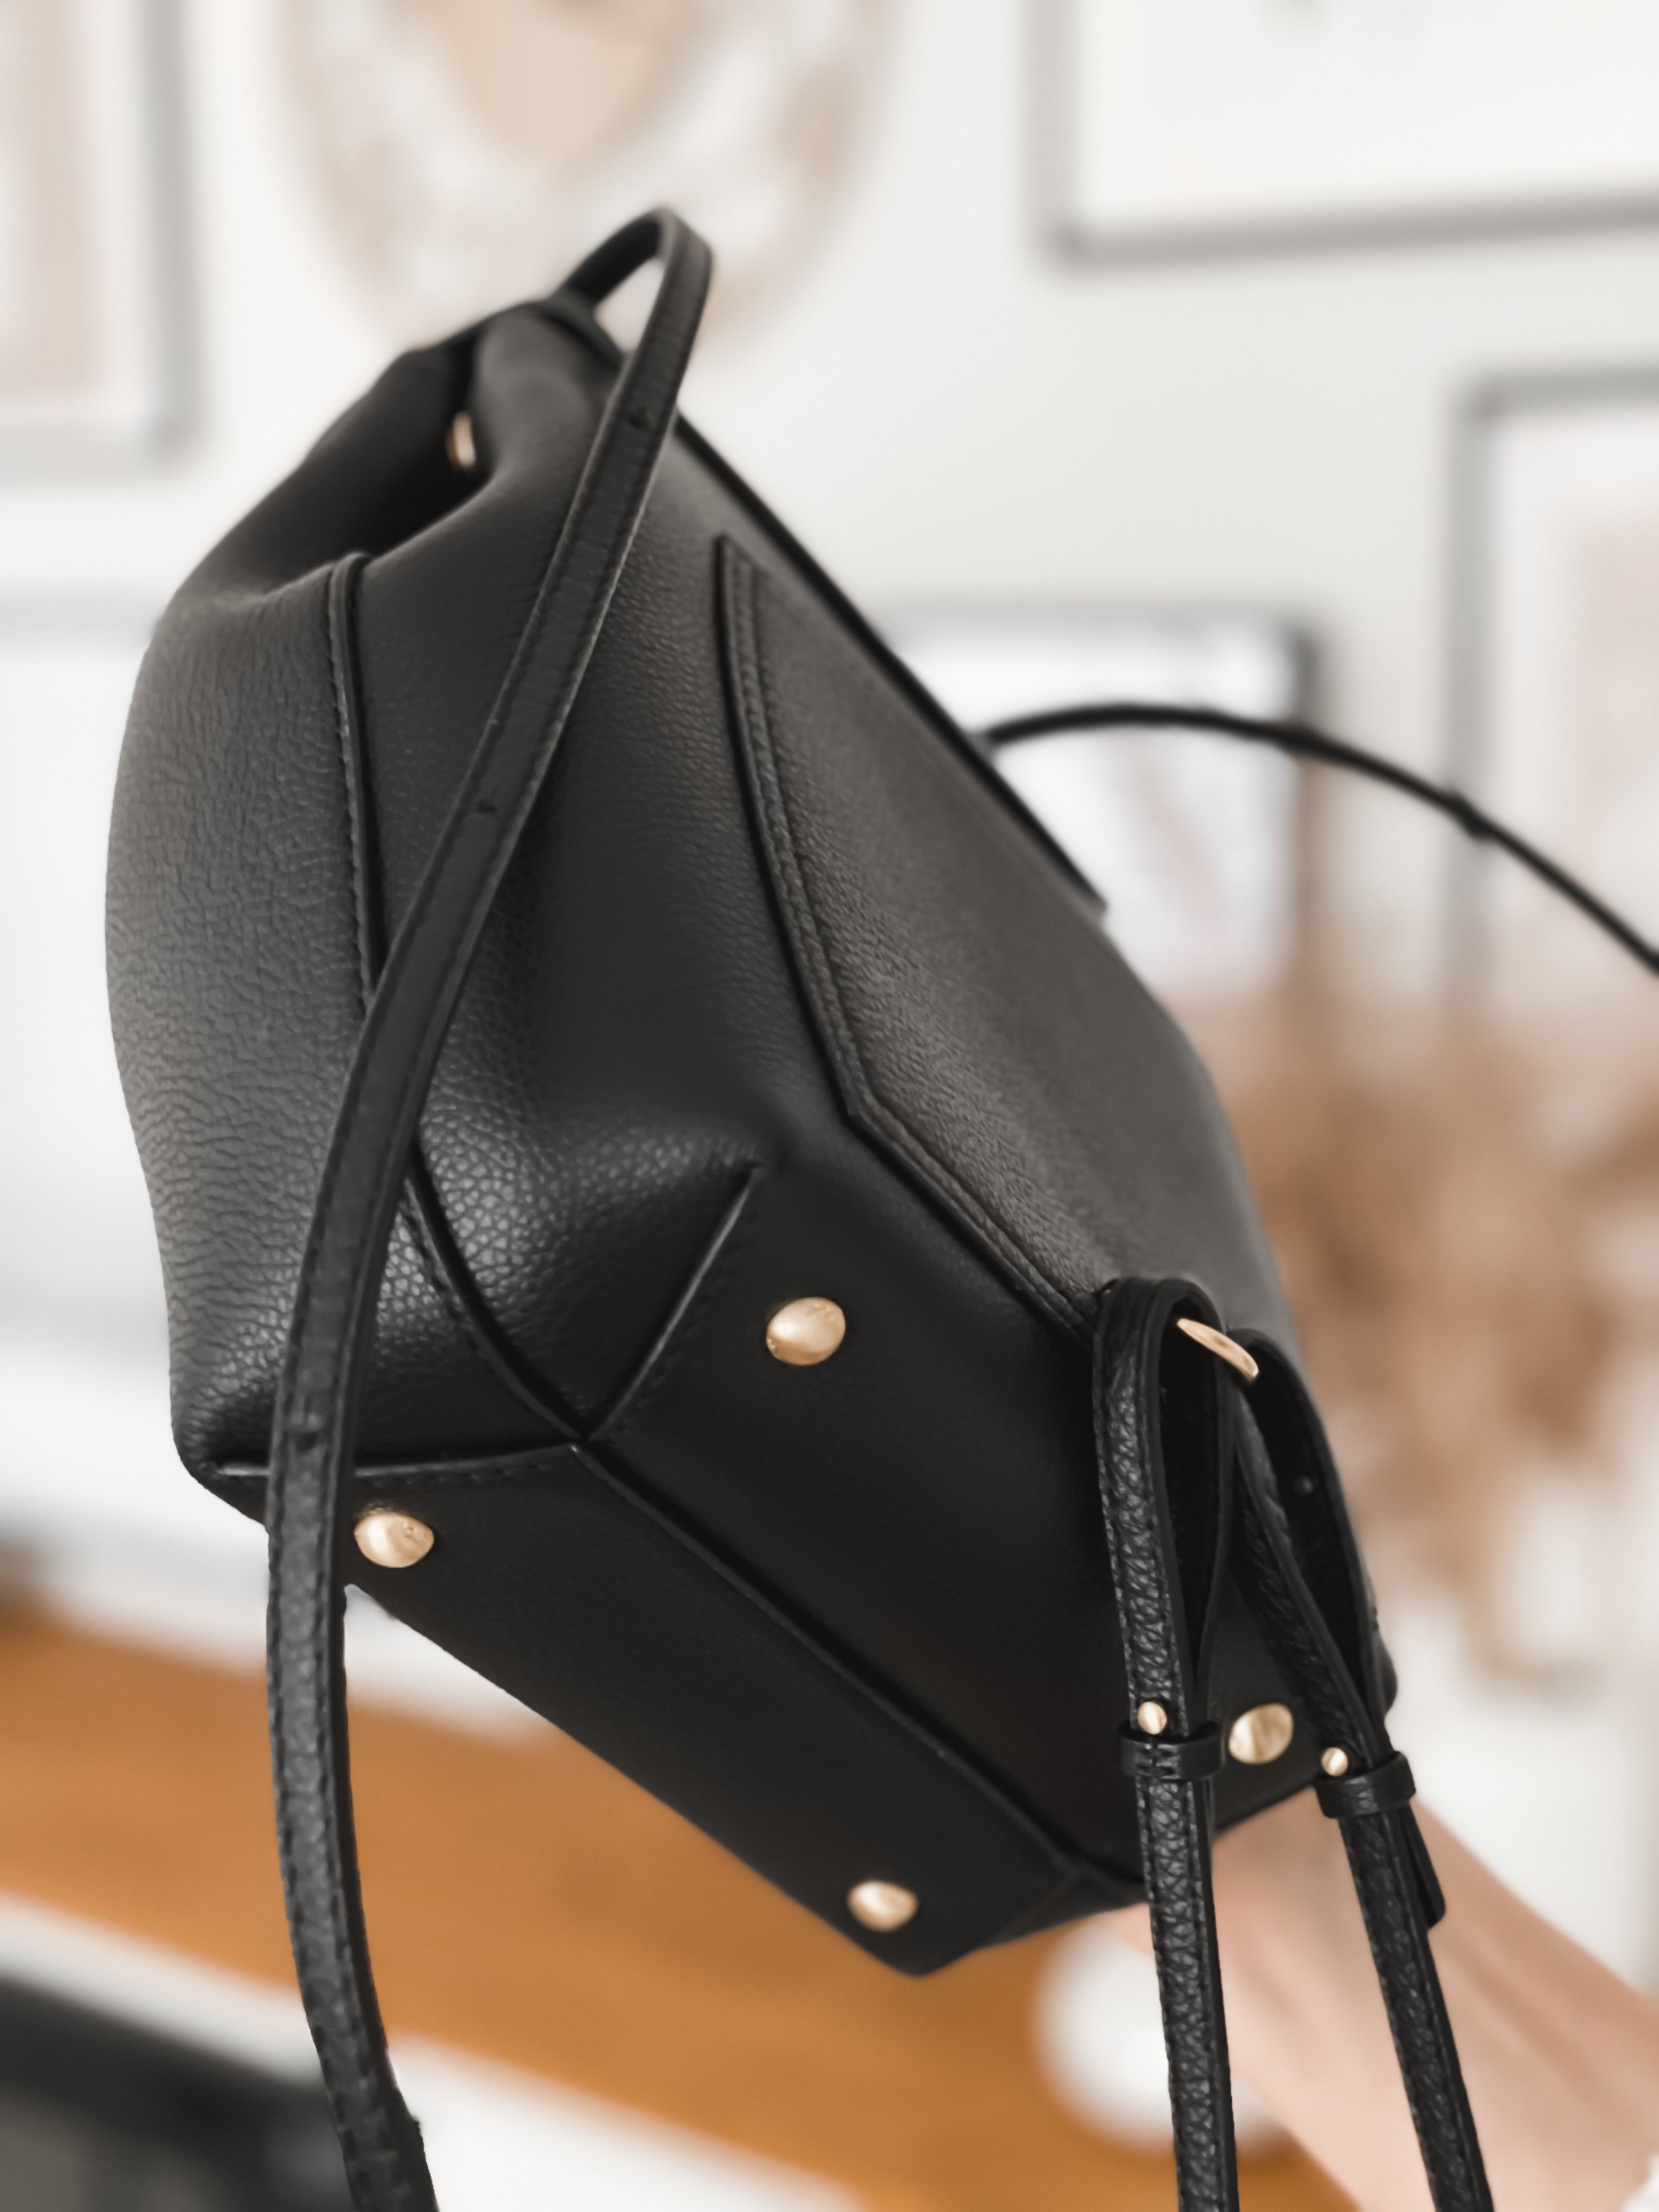 Unsponsored Polene Numero Un Bag Review {Updated September 2021} — Fairly  Curated